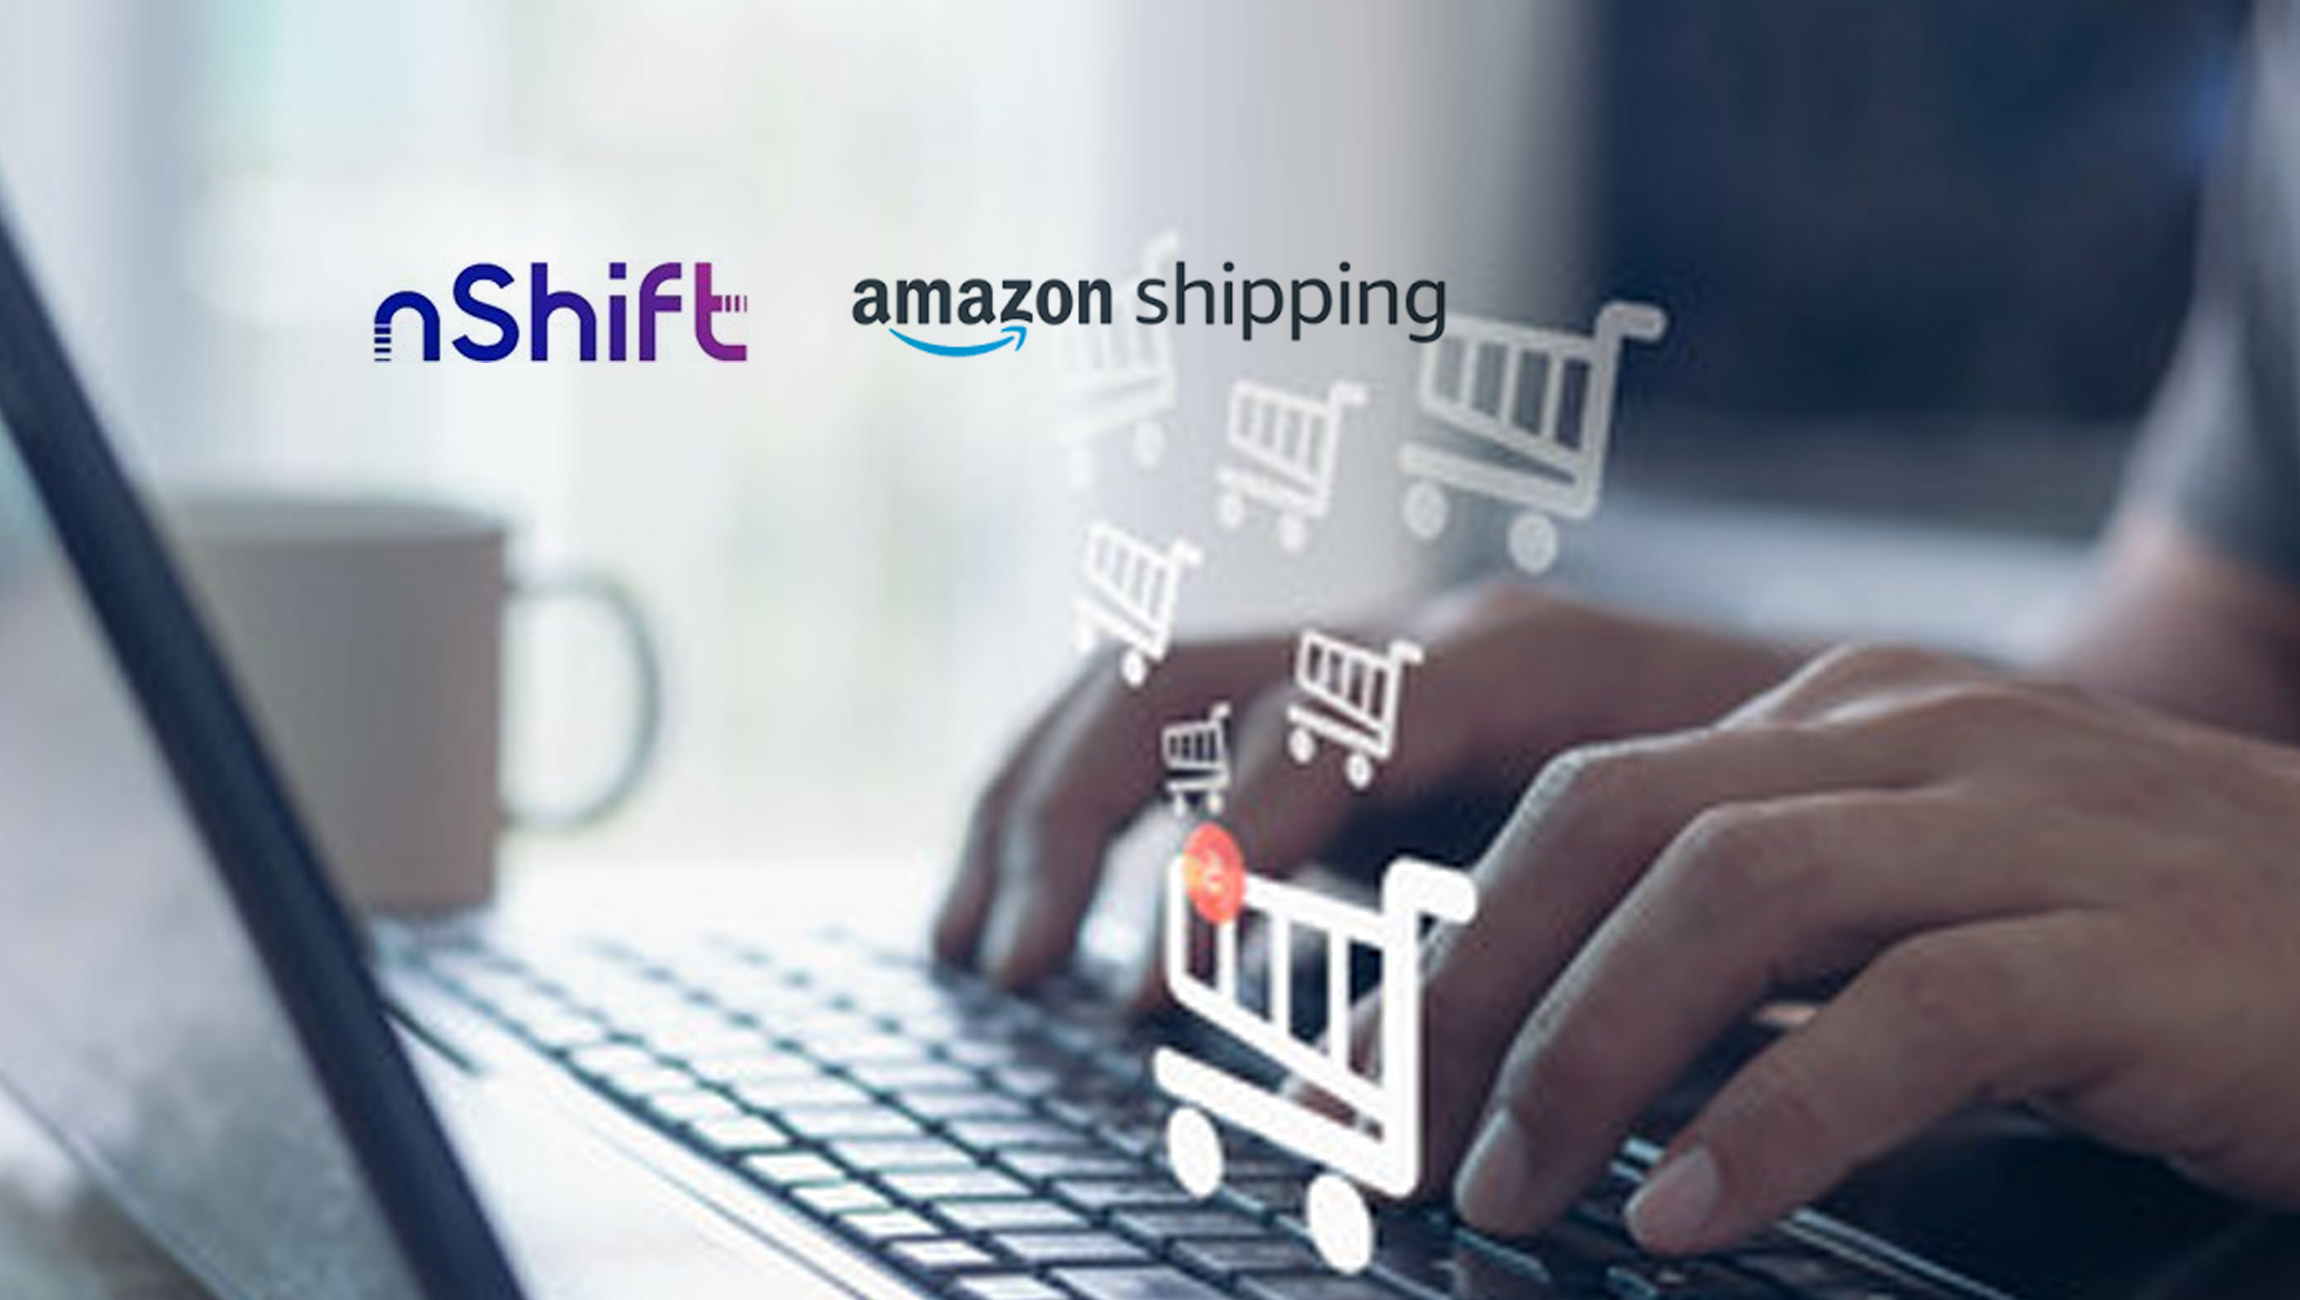 Amazon Shipping and Nshift Team Up to Make Next-Day Delivery Options Easier to Offer